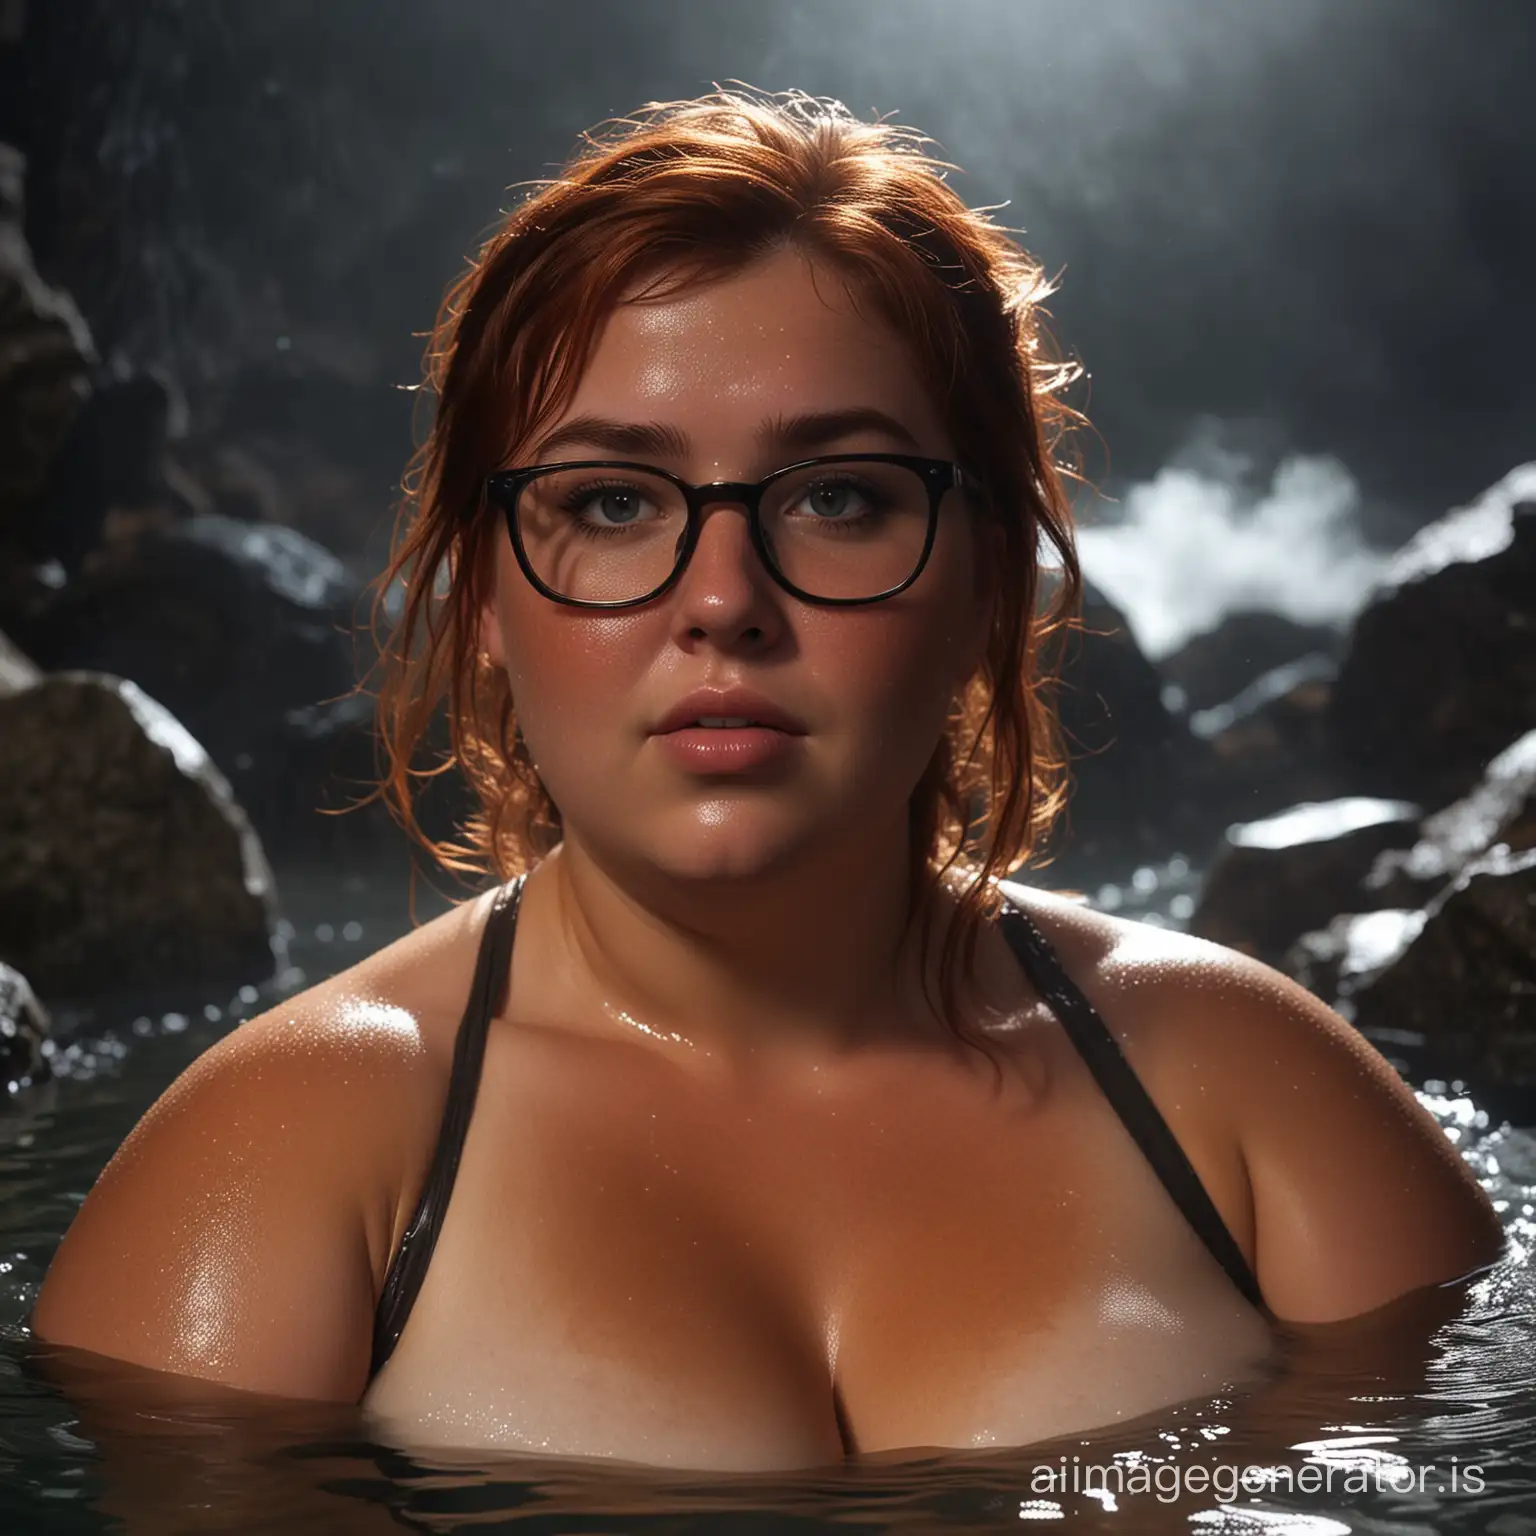 (Masterpiece), Realistic, Perfect face, Scotish ((sunburn skin)) with a tanlines skin obese Fat plump chubby female, dark-ginger hair, Glasses Expressive eyes, on the rocks in the water of a hotspring bathhouse under the moonlight, Tanlines tanned skin, Long gigner hair, ((steam)), fog, cloud, wet pubic hair